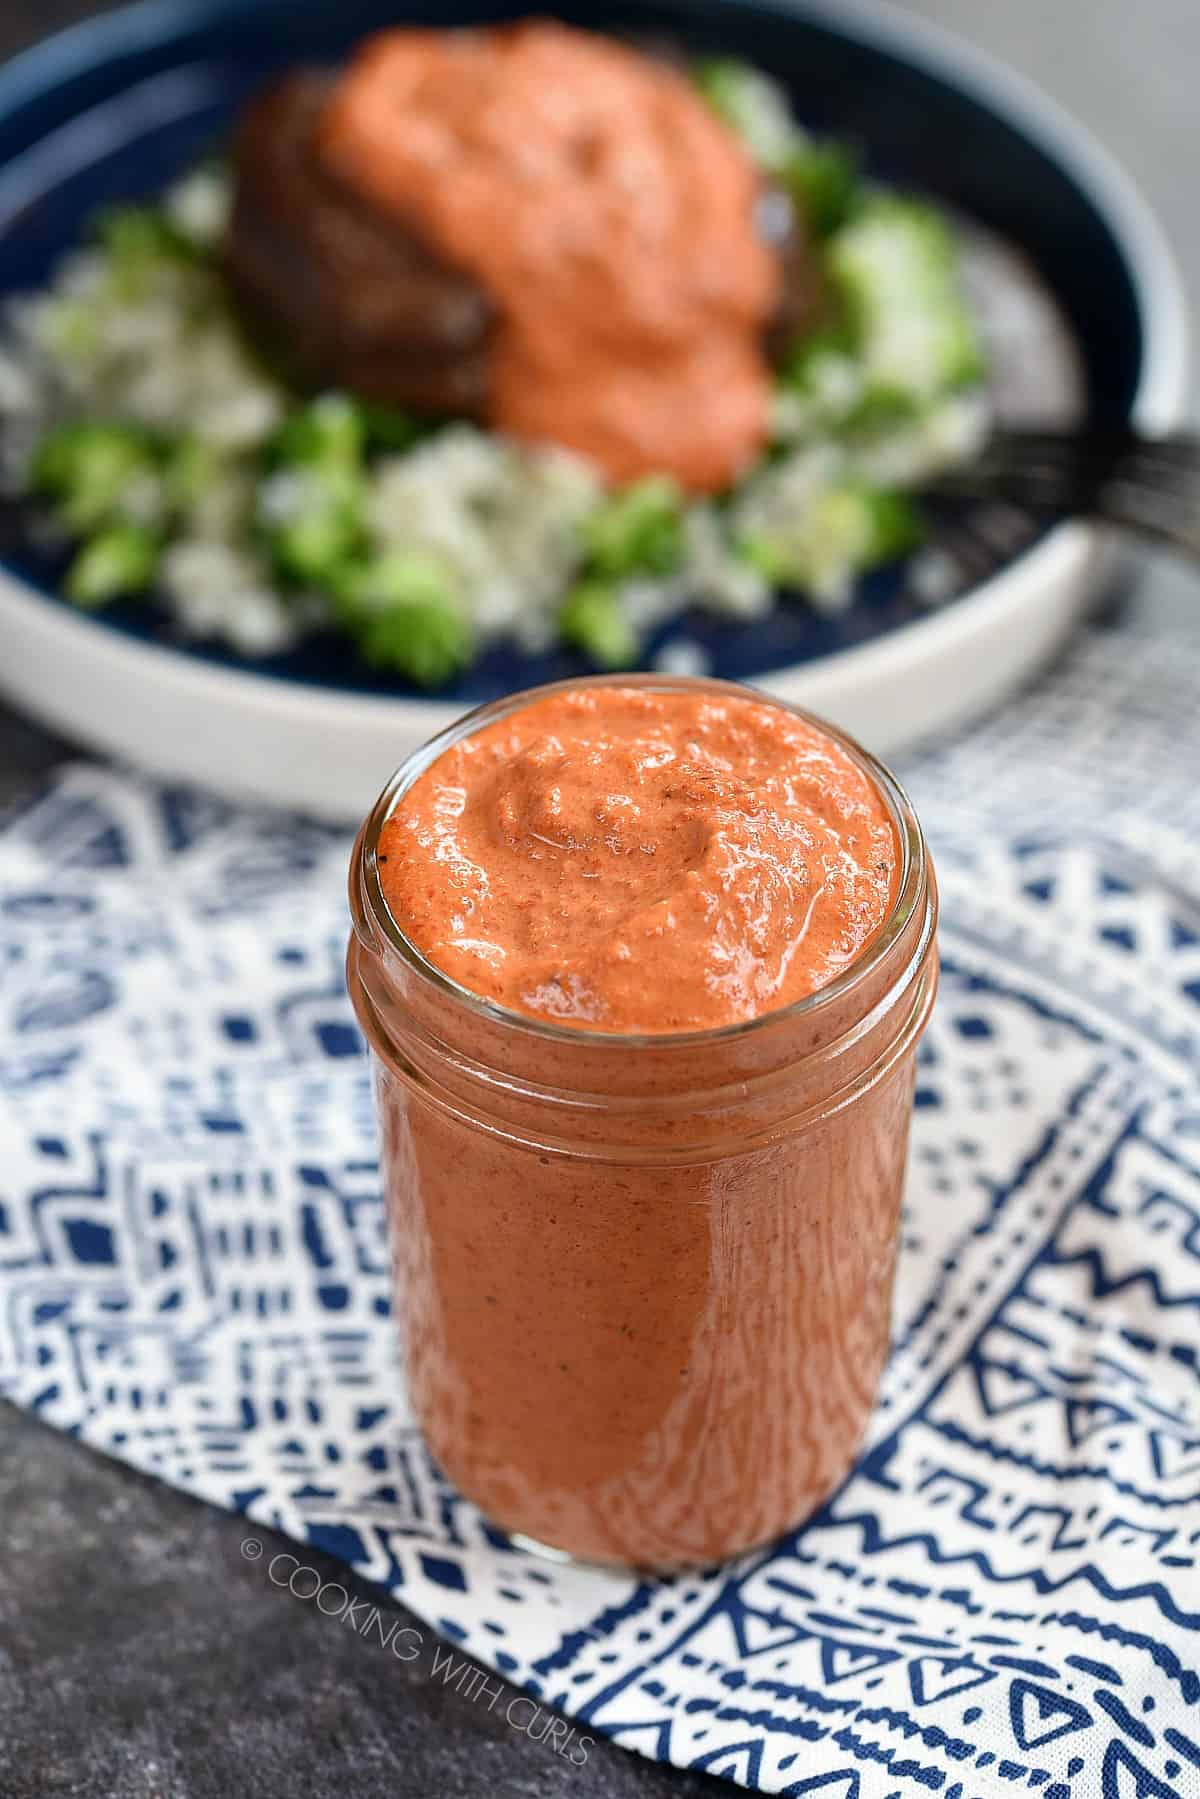 A glass jar filled with roasted Red Pepper Pesto Sauce sitting on a blue and white patterned napkin with a sauce covered steak on a blue plate in the background.